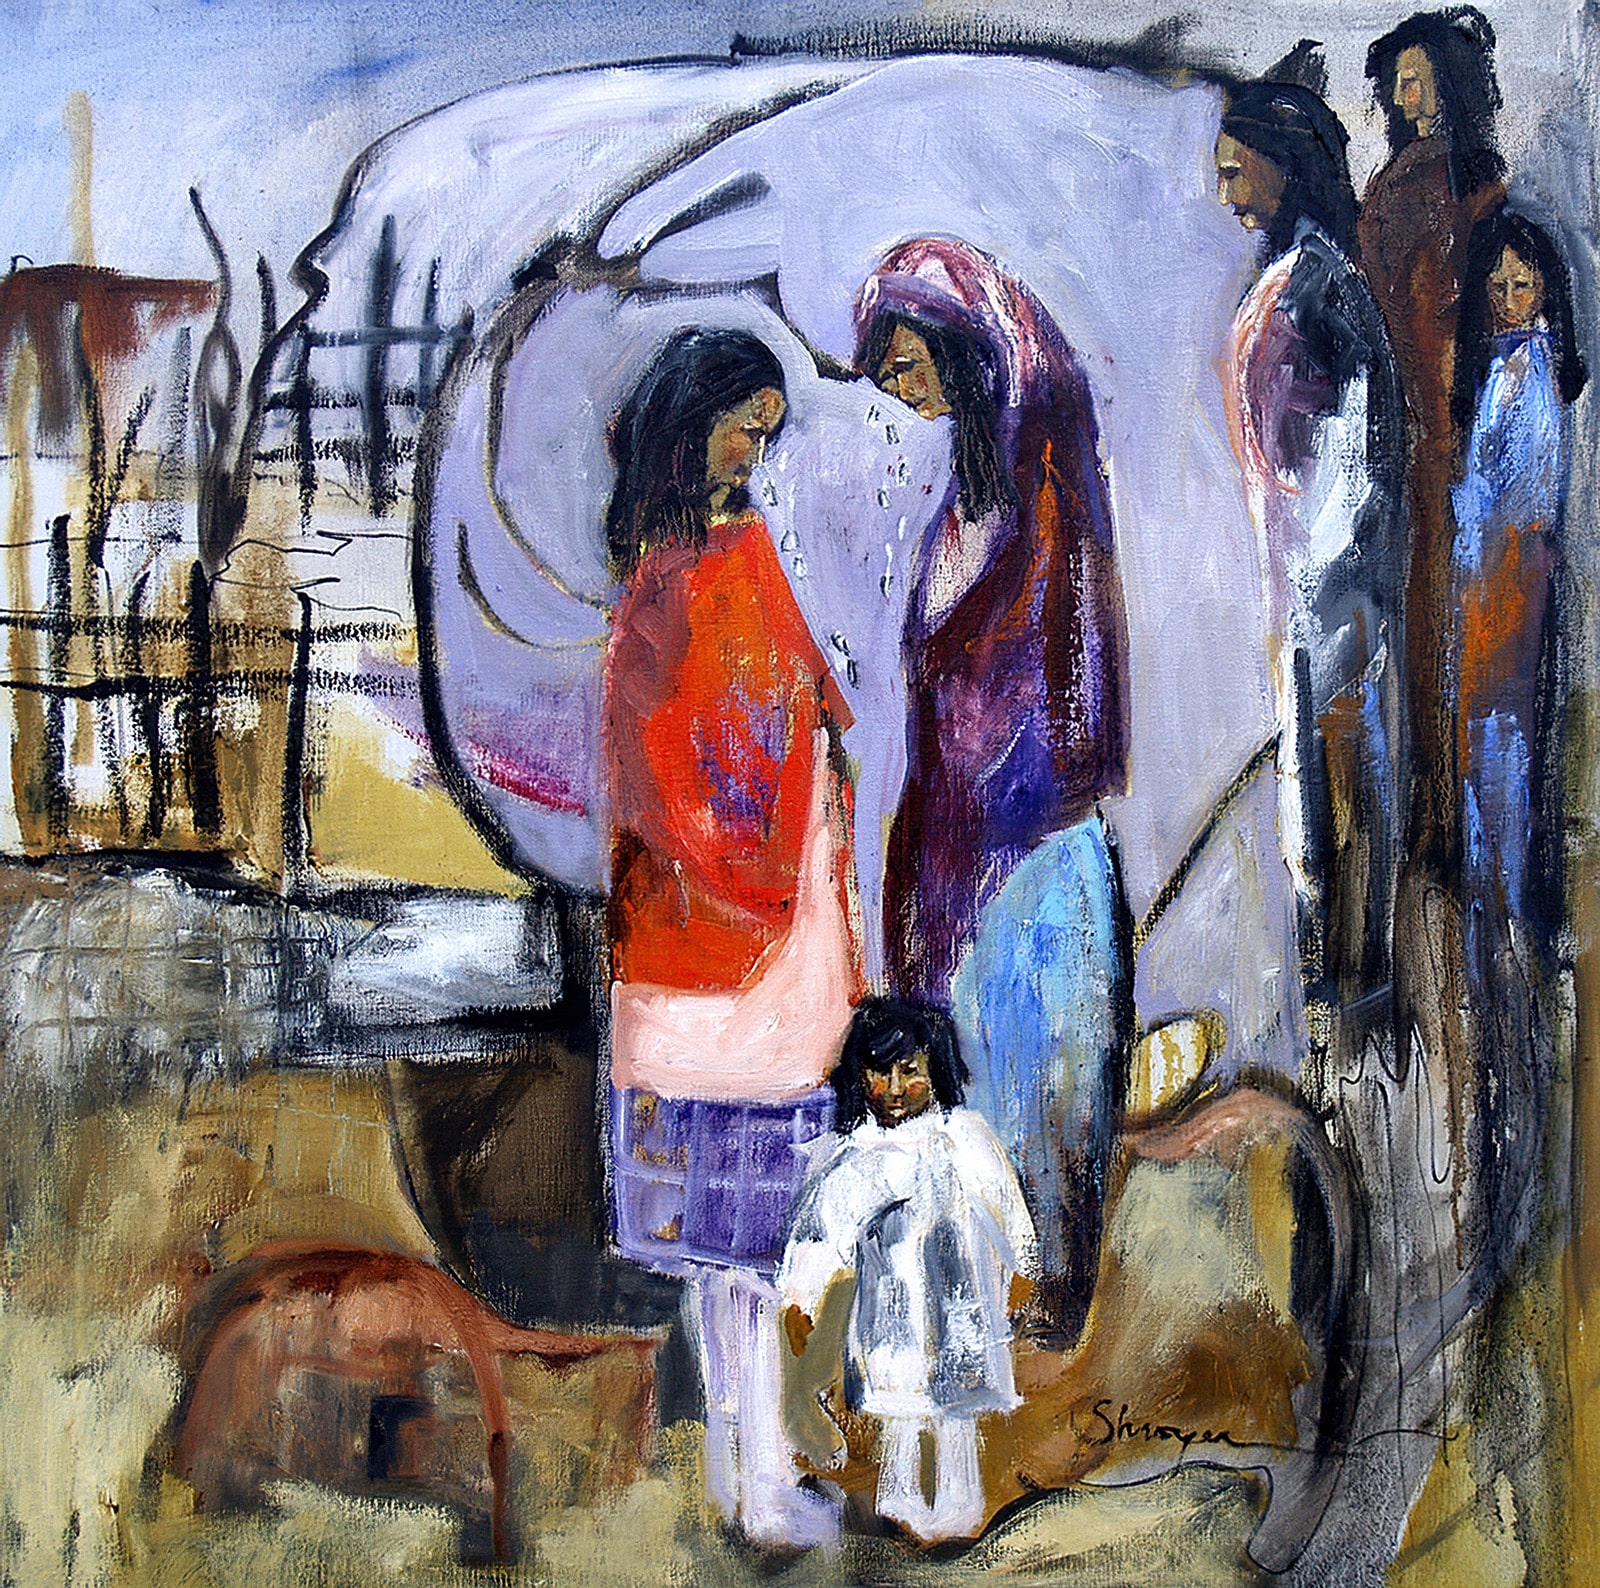 "The Long Walk Of The Navajos To Bosque Redondo" Oil On Canvas by Charlotte Shroyer